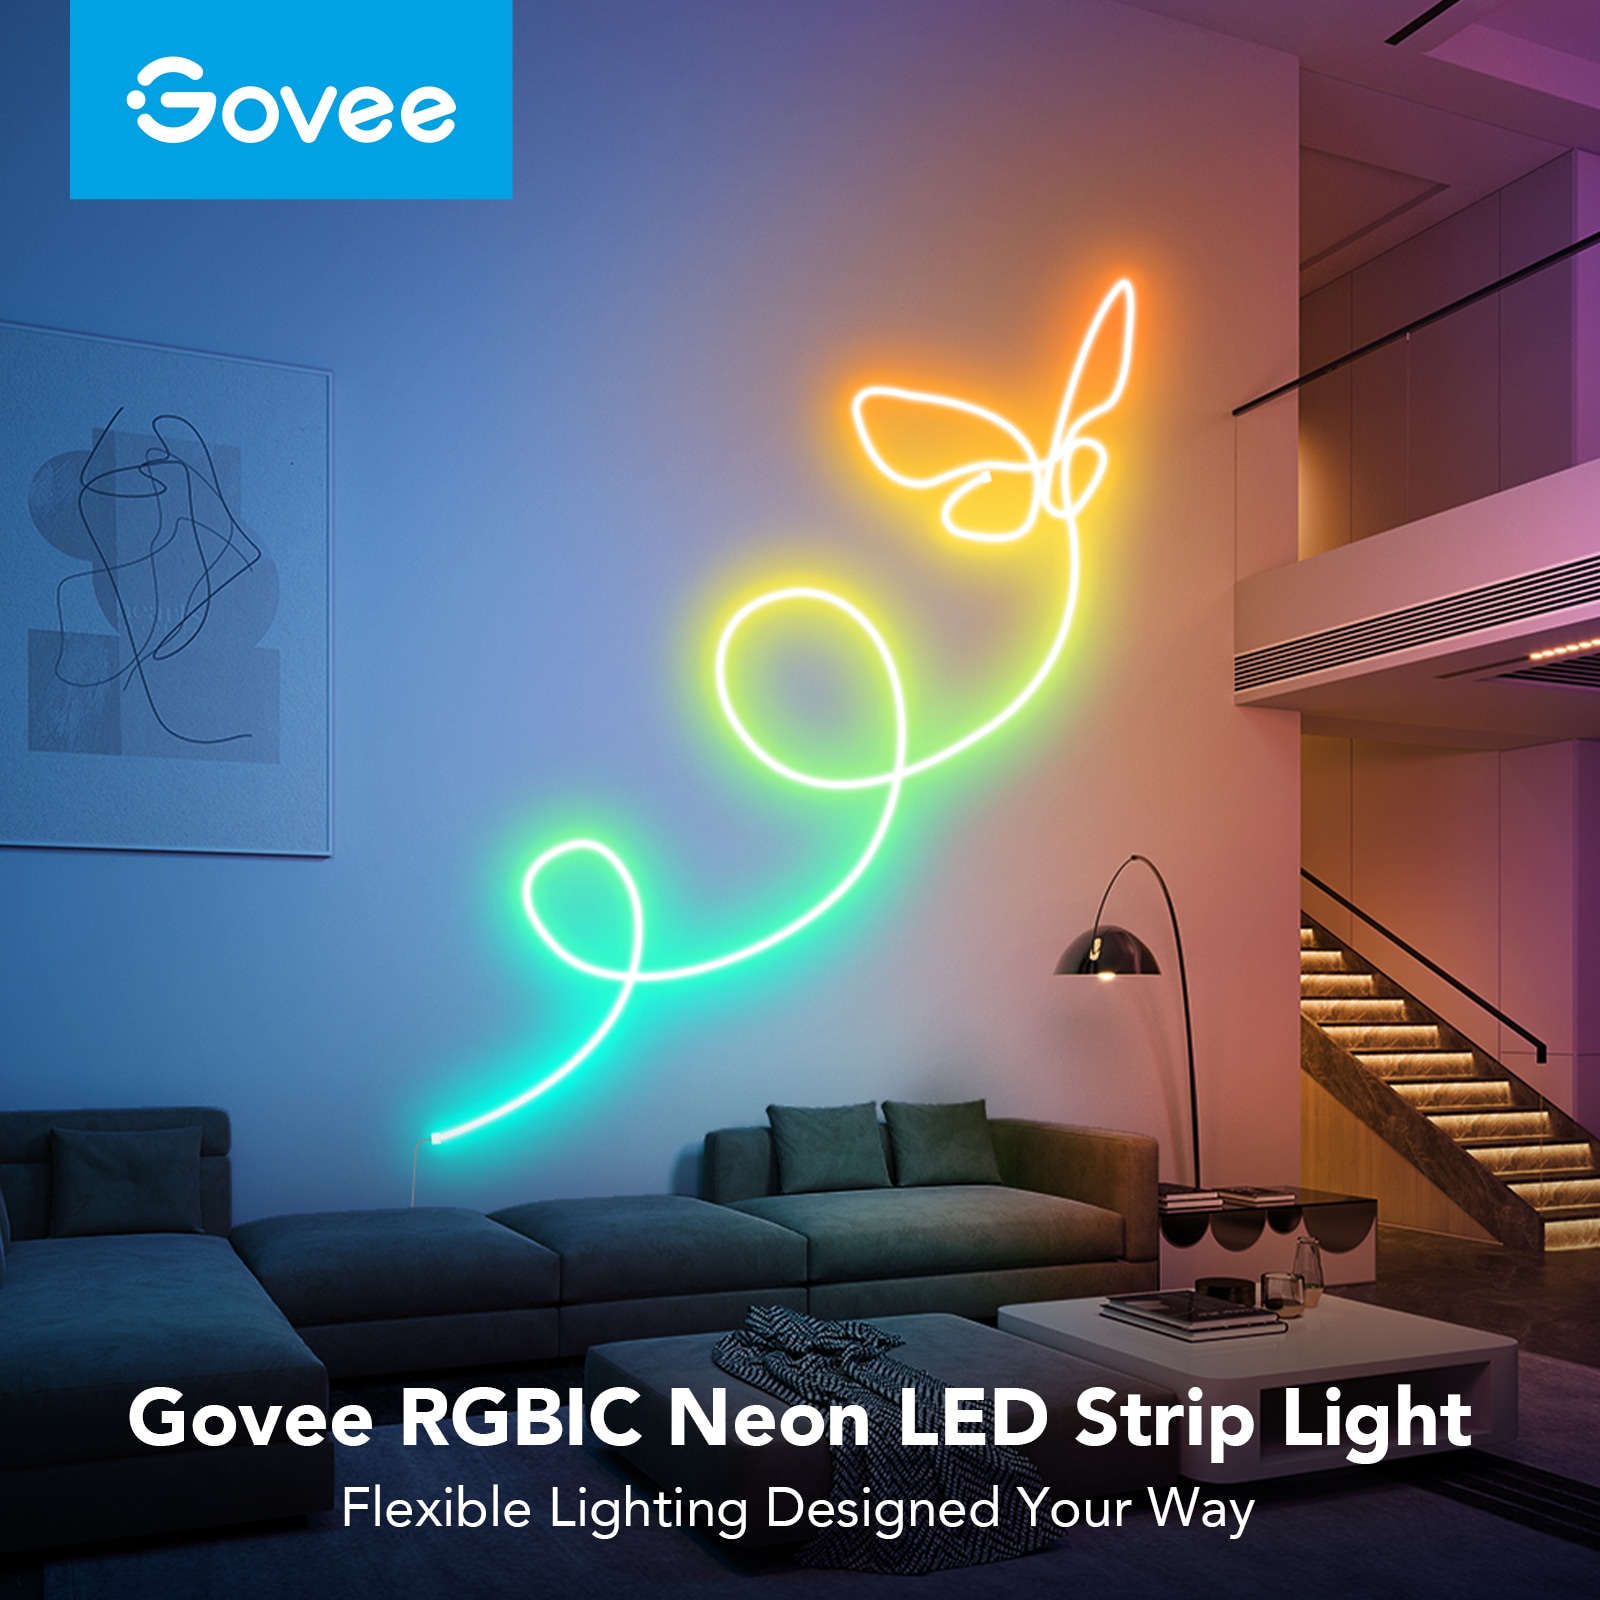 Govee 6.5-ft Integrated Multicolor Rope Light in Rope Lights department at Lowes.com